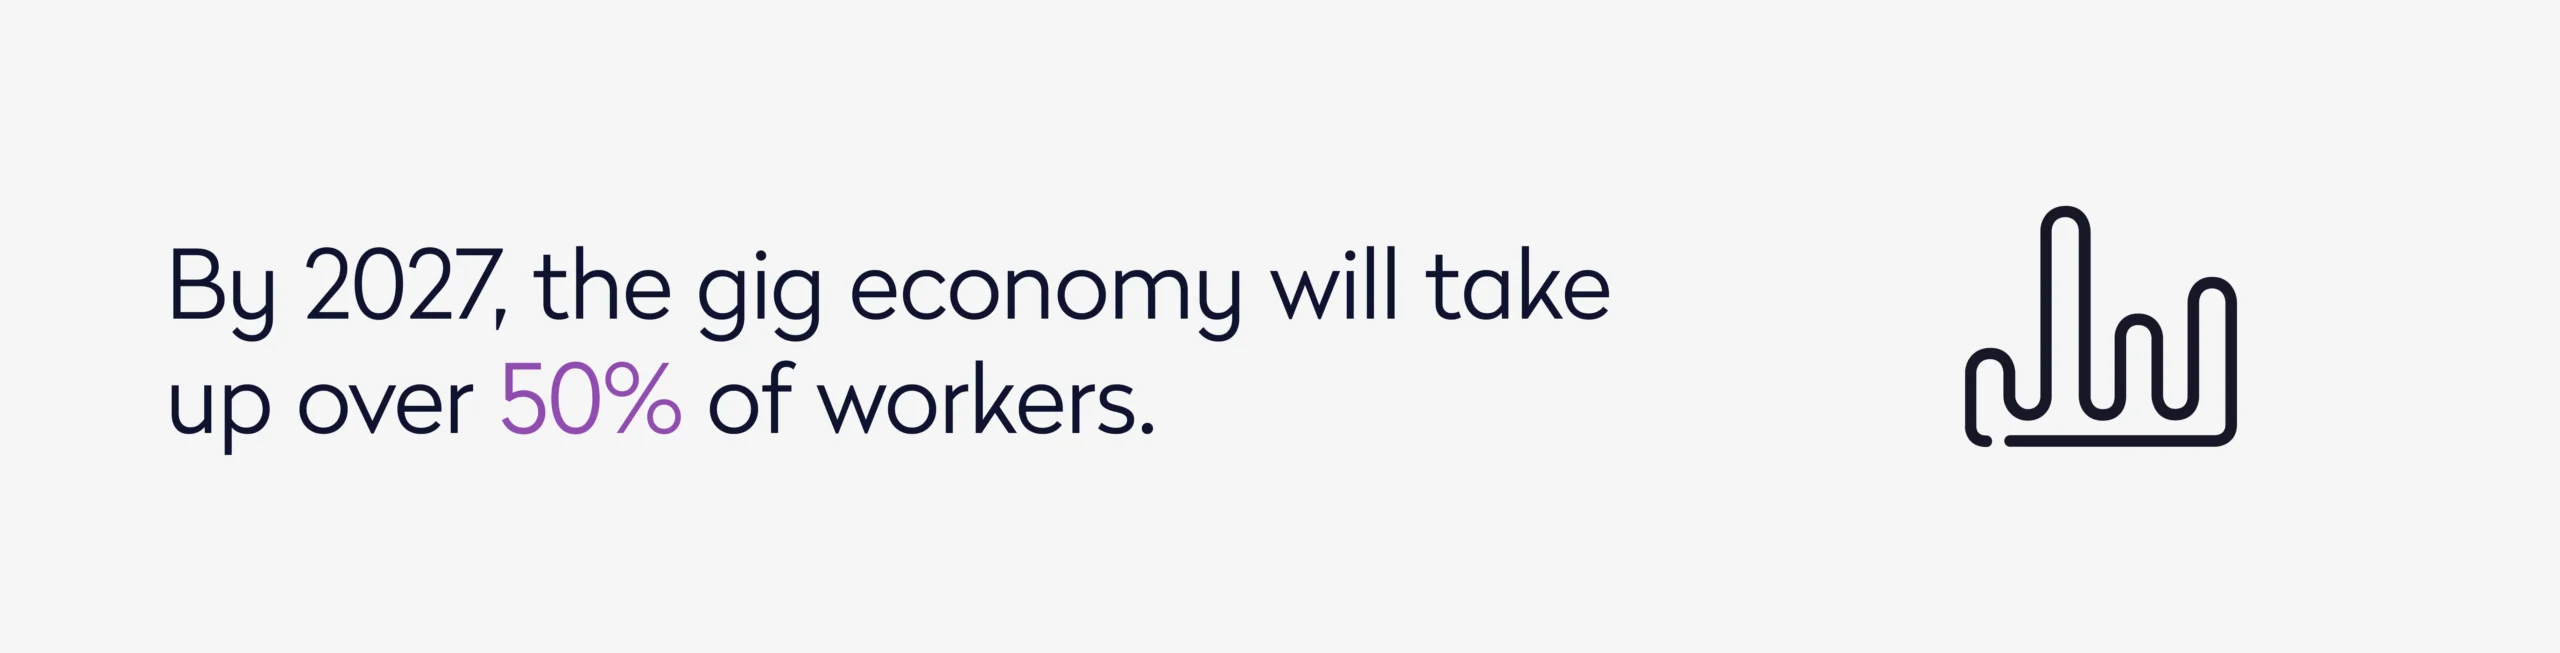 By 2027 the gig economy will take up over 50 percent of workers